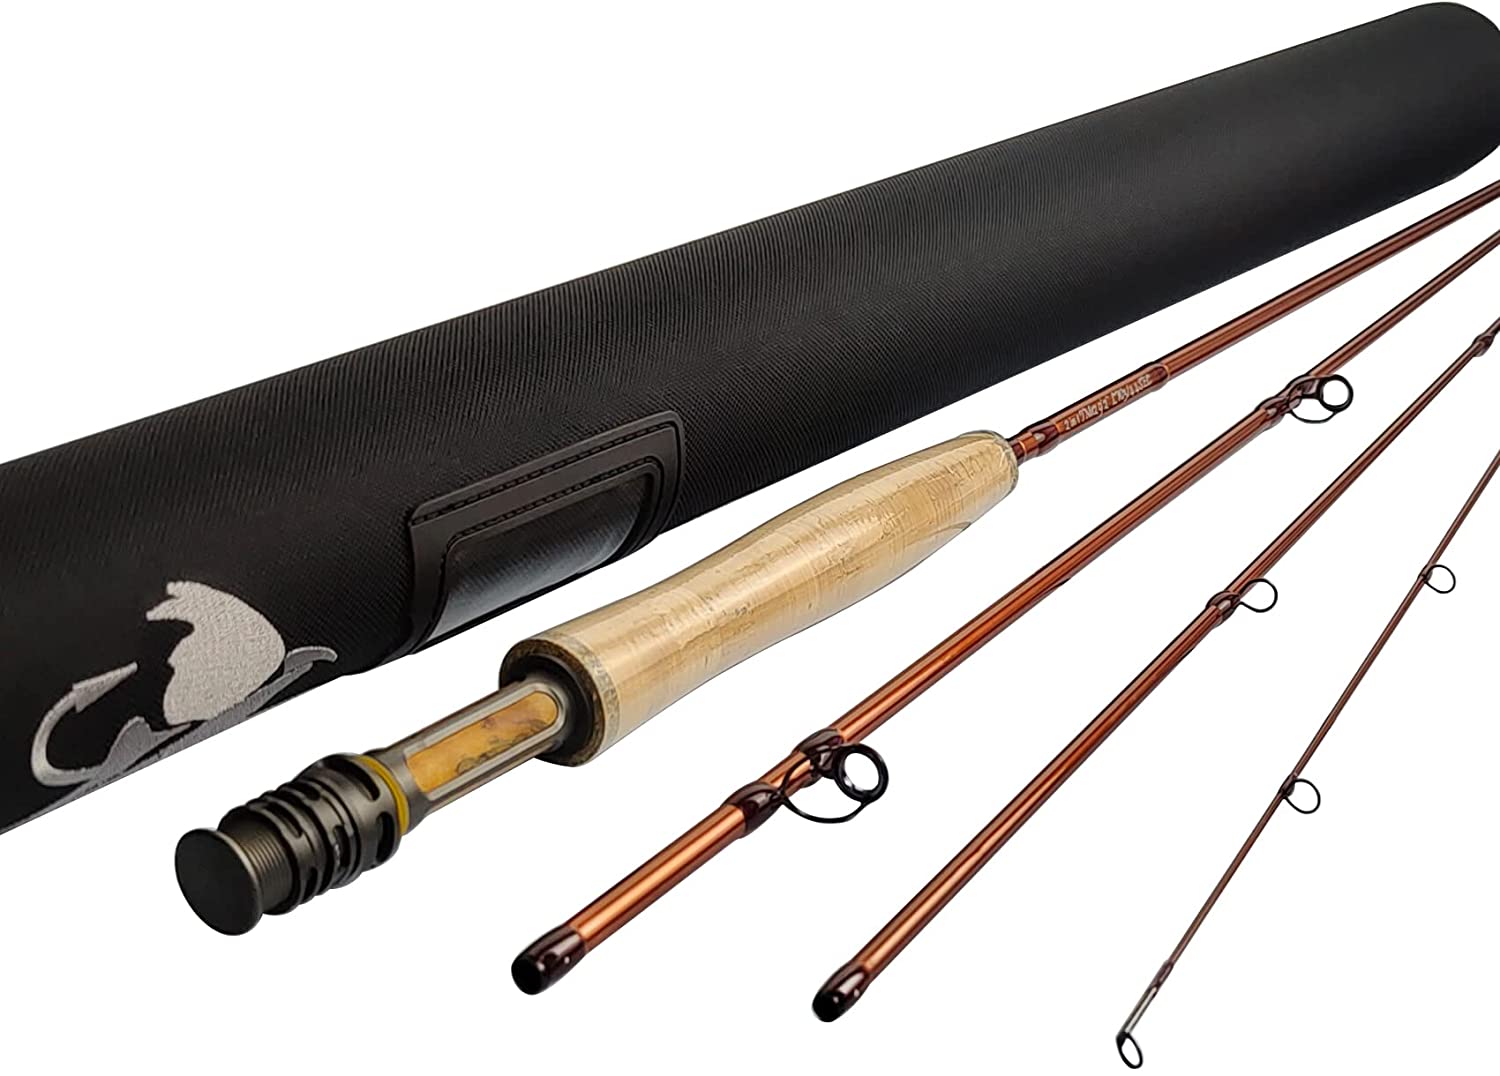 Aventik Z 2in1 Fly Fishing rods IM12 Nano Fast Action rods with Extra  Extension Section rods 9\\\'2\\\'\\\' LW3/4 4pc into 10’6” LW3/4 9’ 5/6 4pc  into